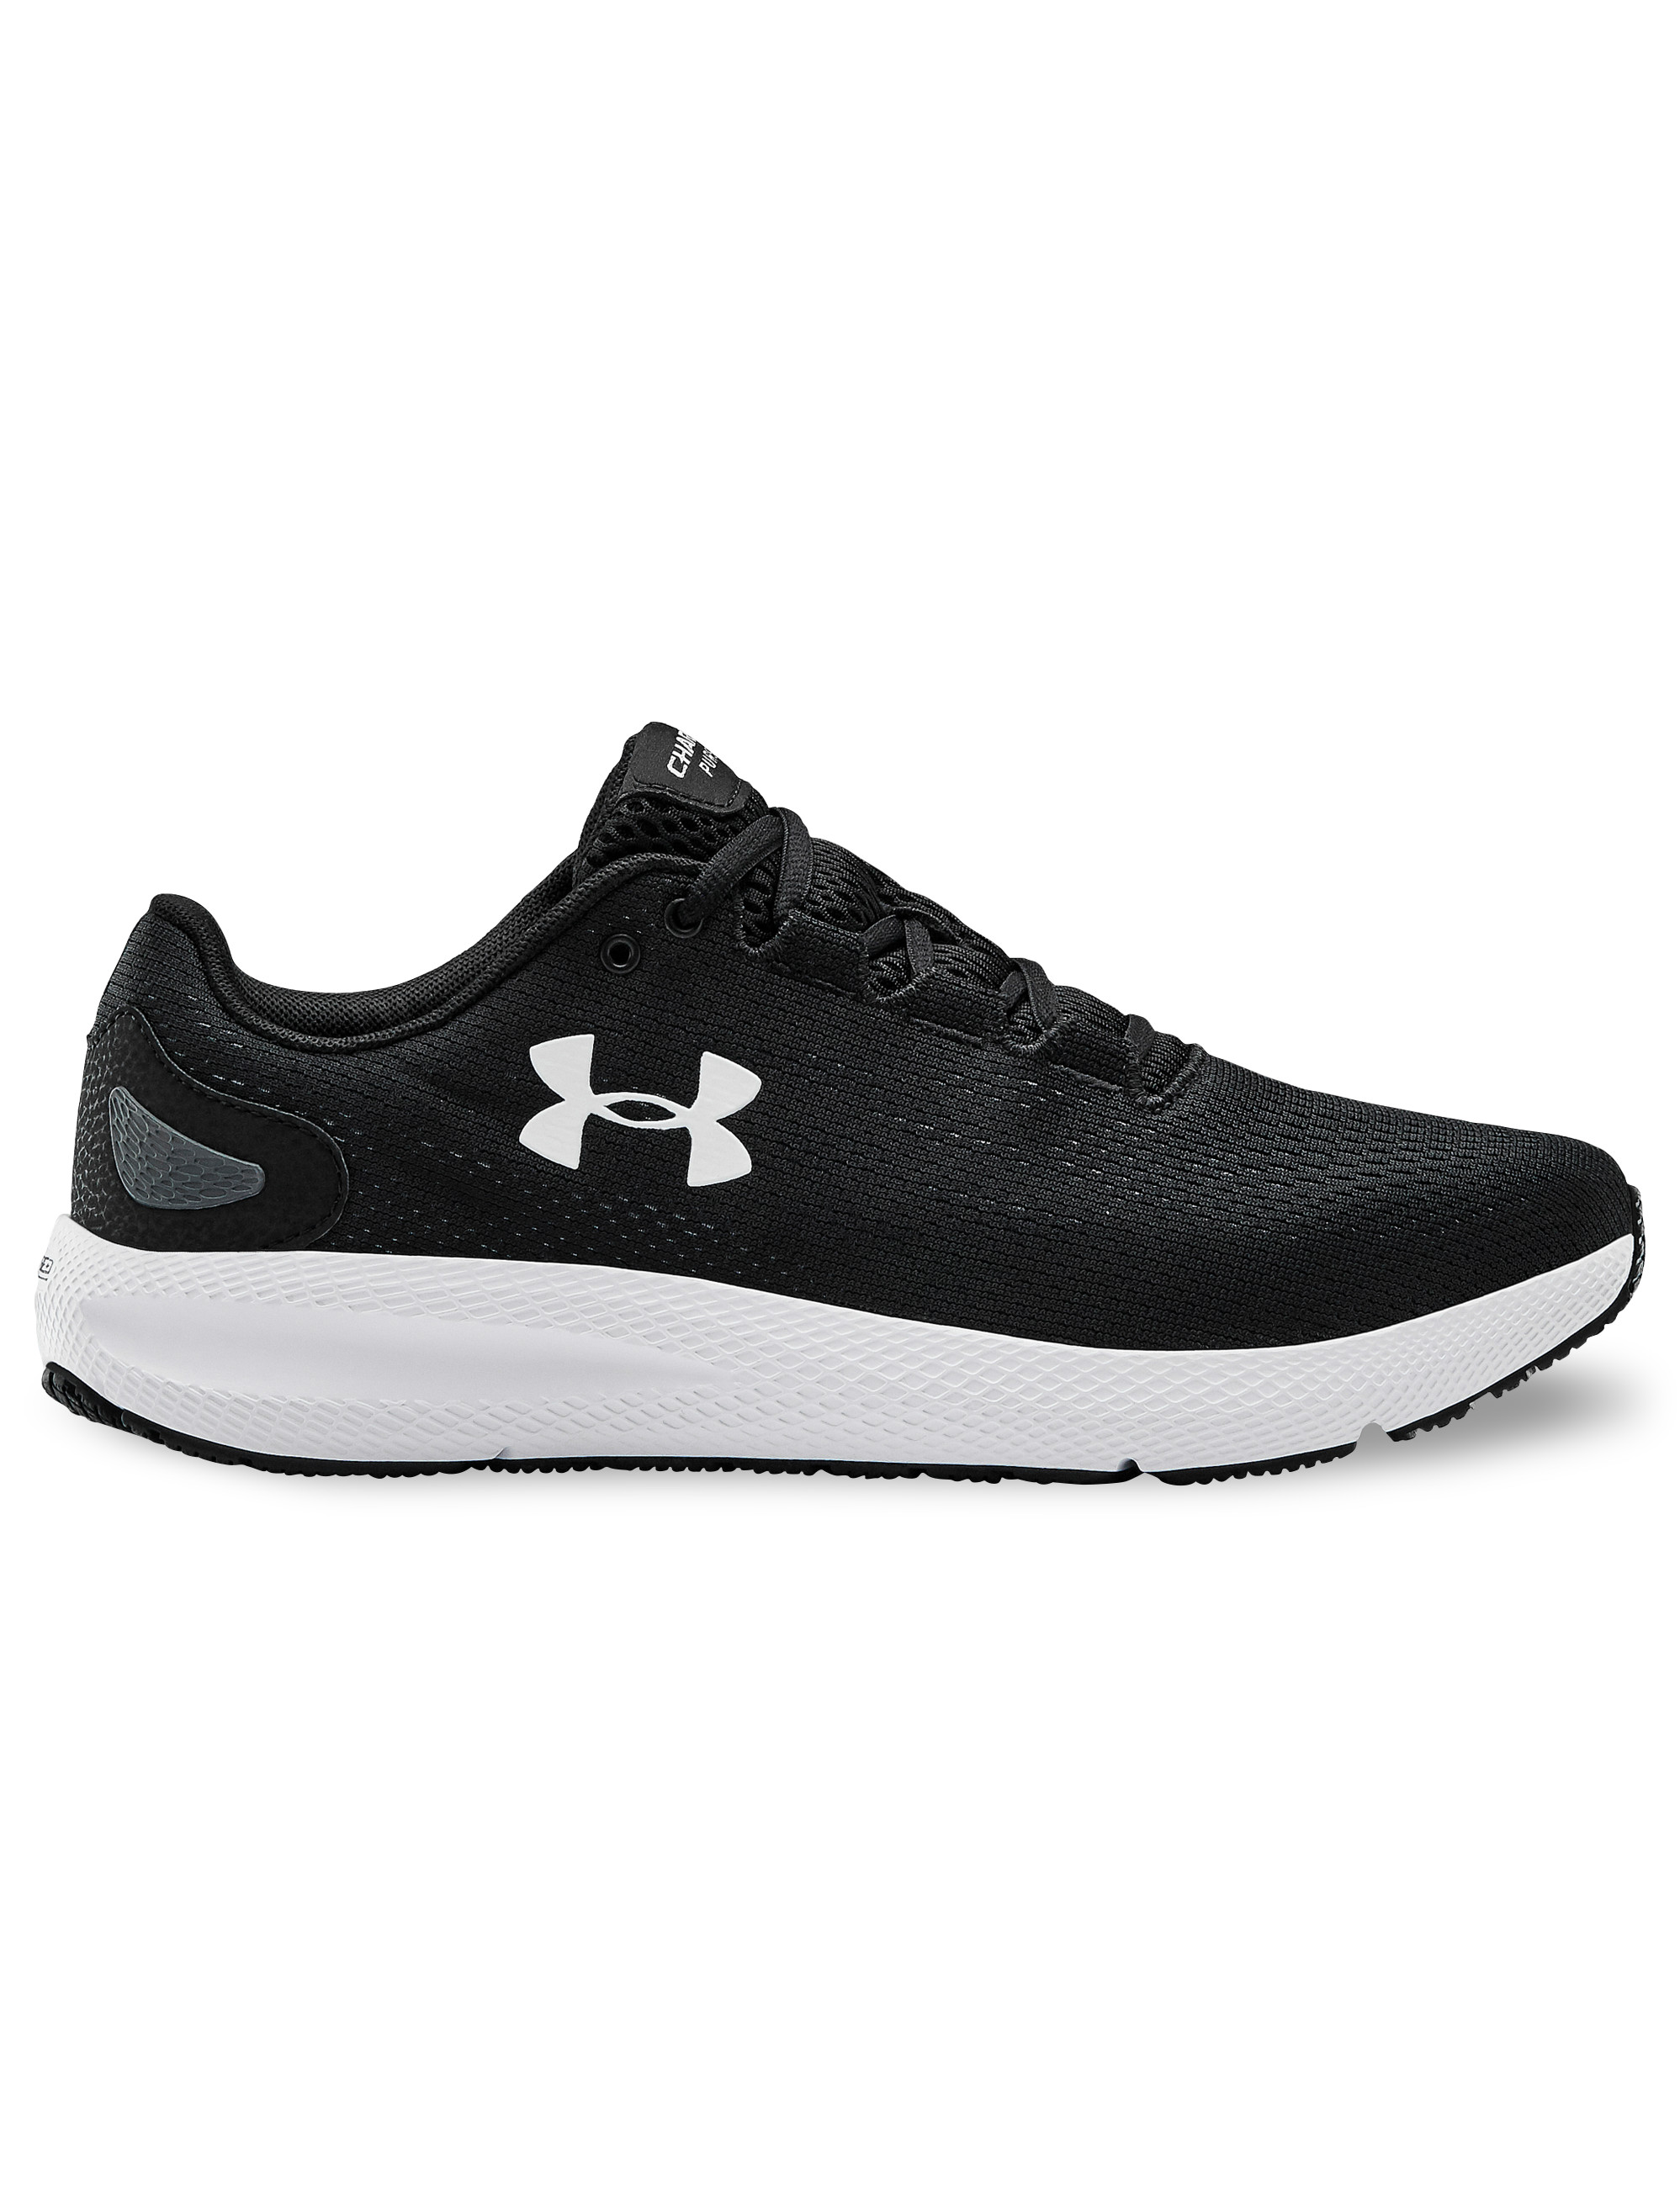 Under Armour Big and Tall Men's 